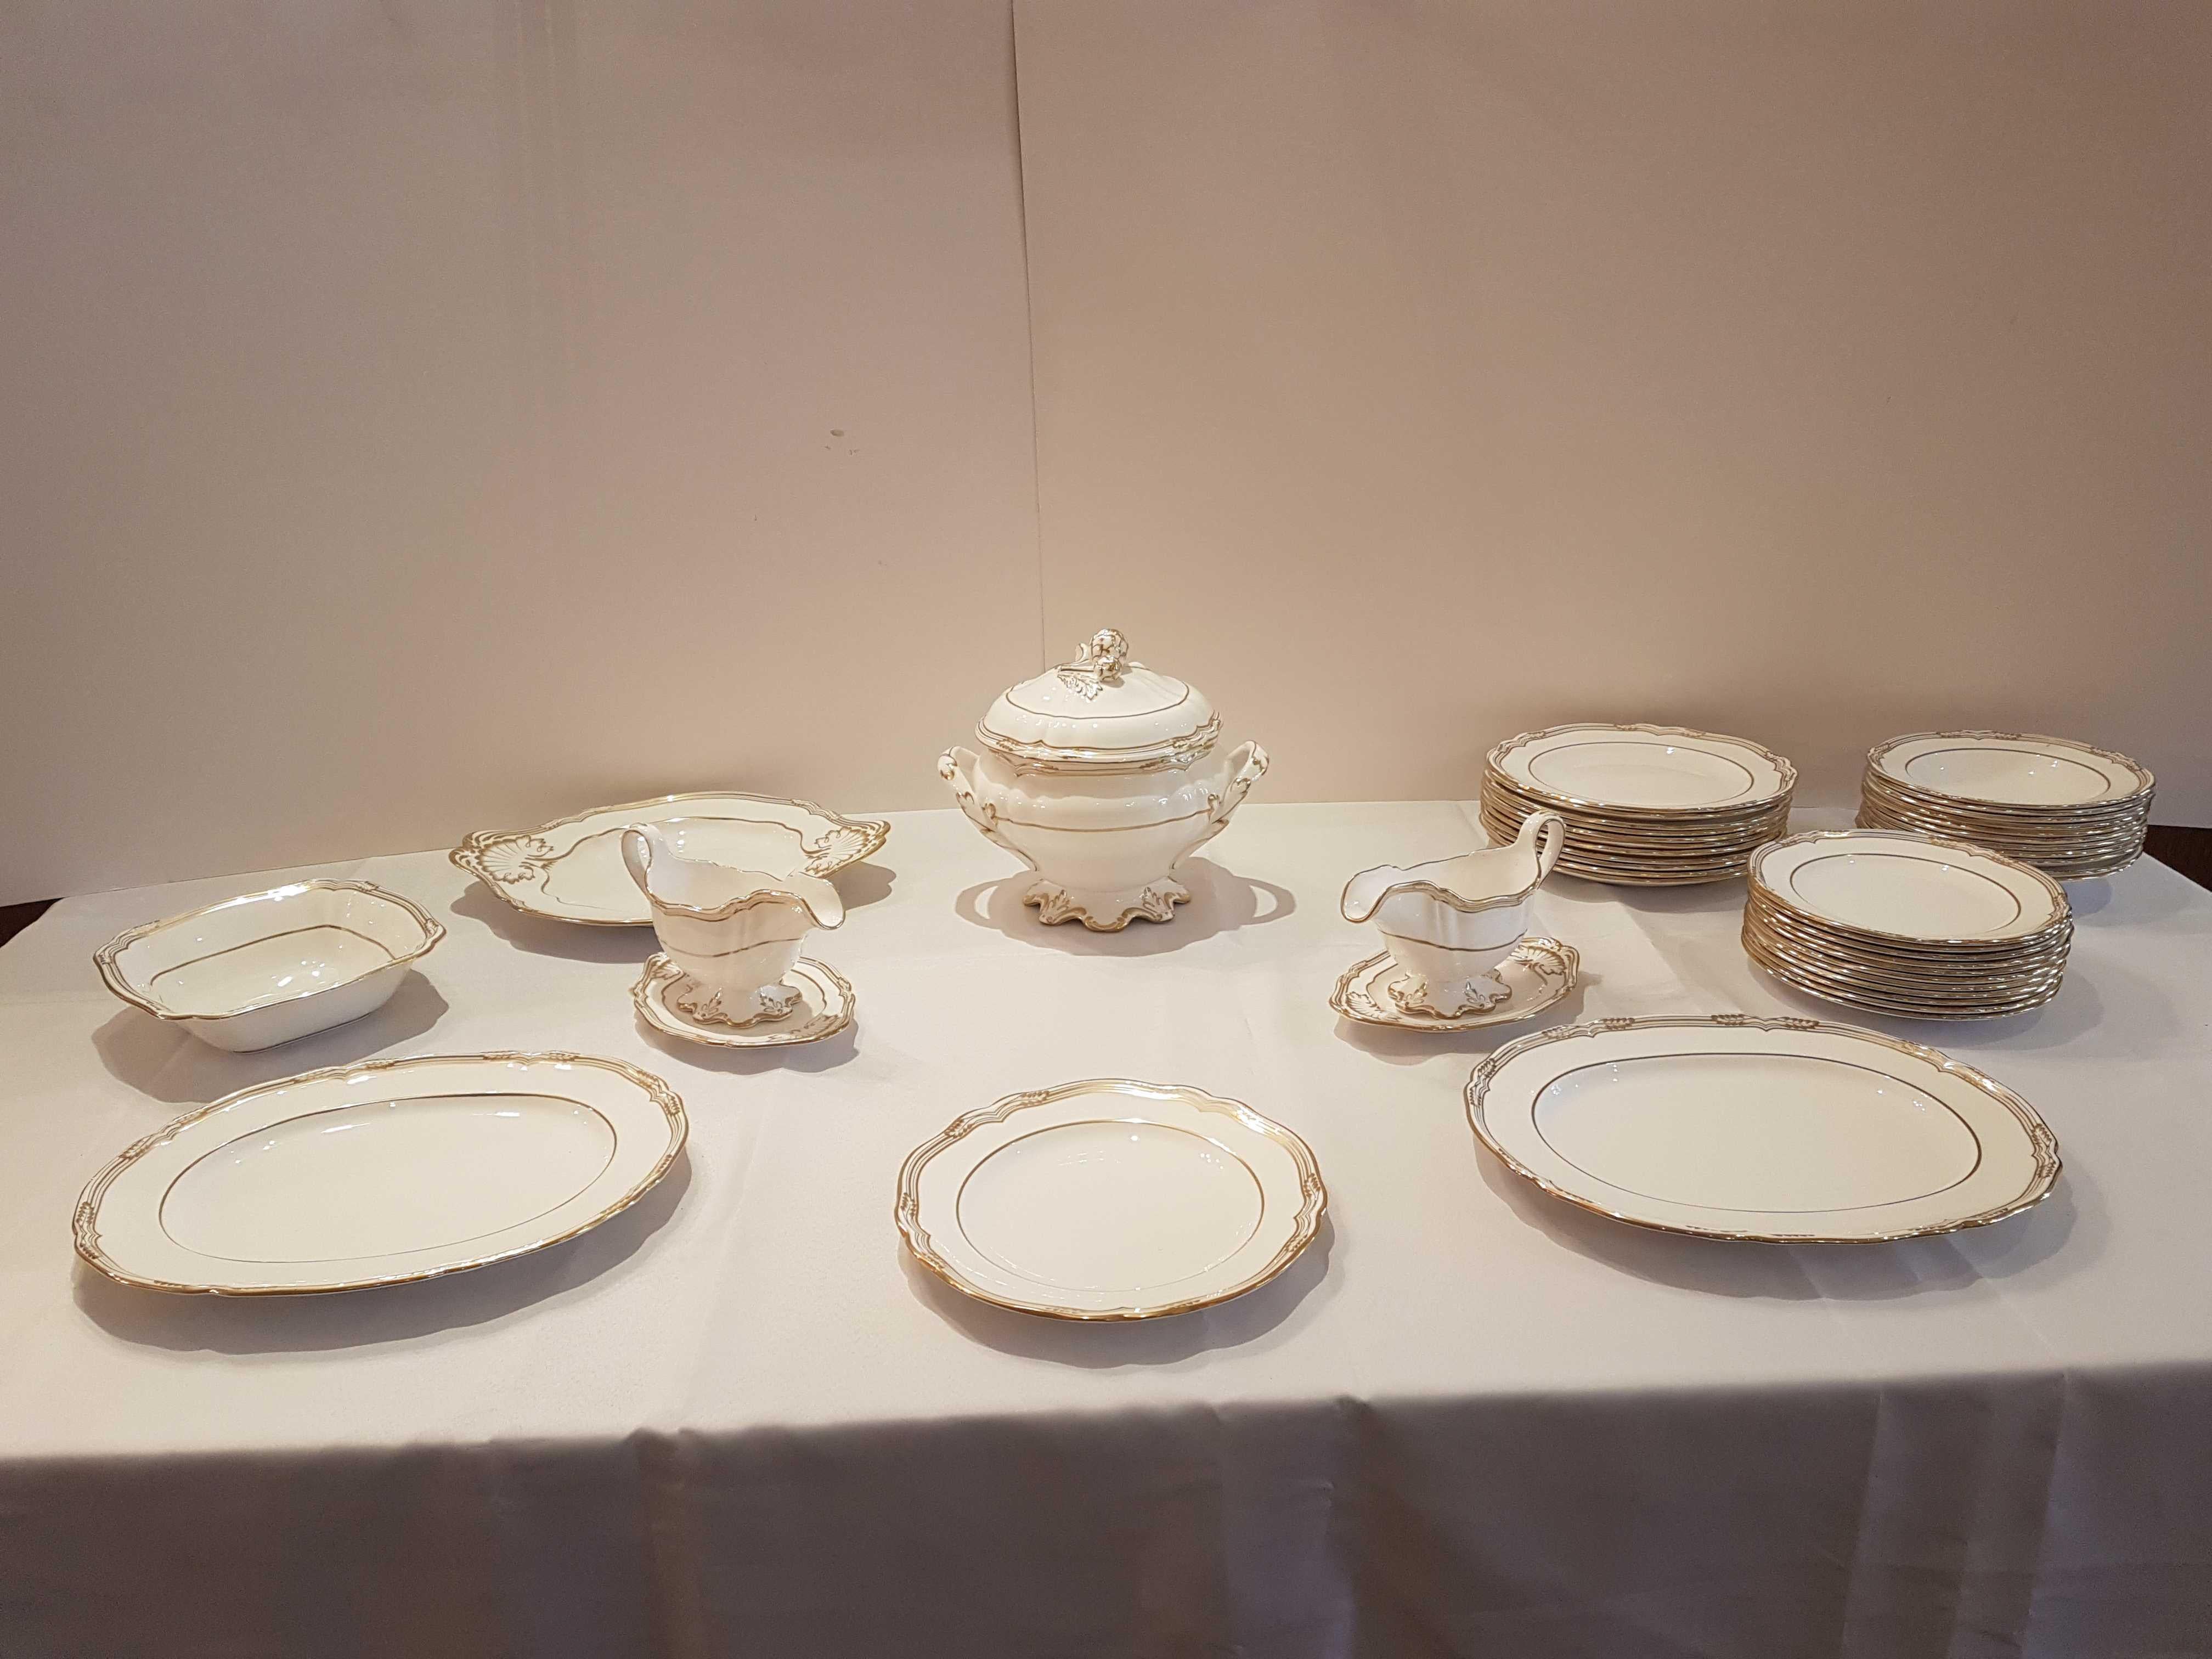 An hand-worked English bone china dinner service.
An inspired interpretation of the spirit of English silver, an abundance of hand-worked gold is used to accentuate the richness of detail in the distinctive traditional Spode's Stafford shape.
A